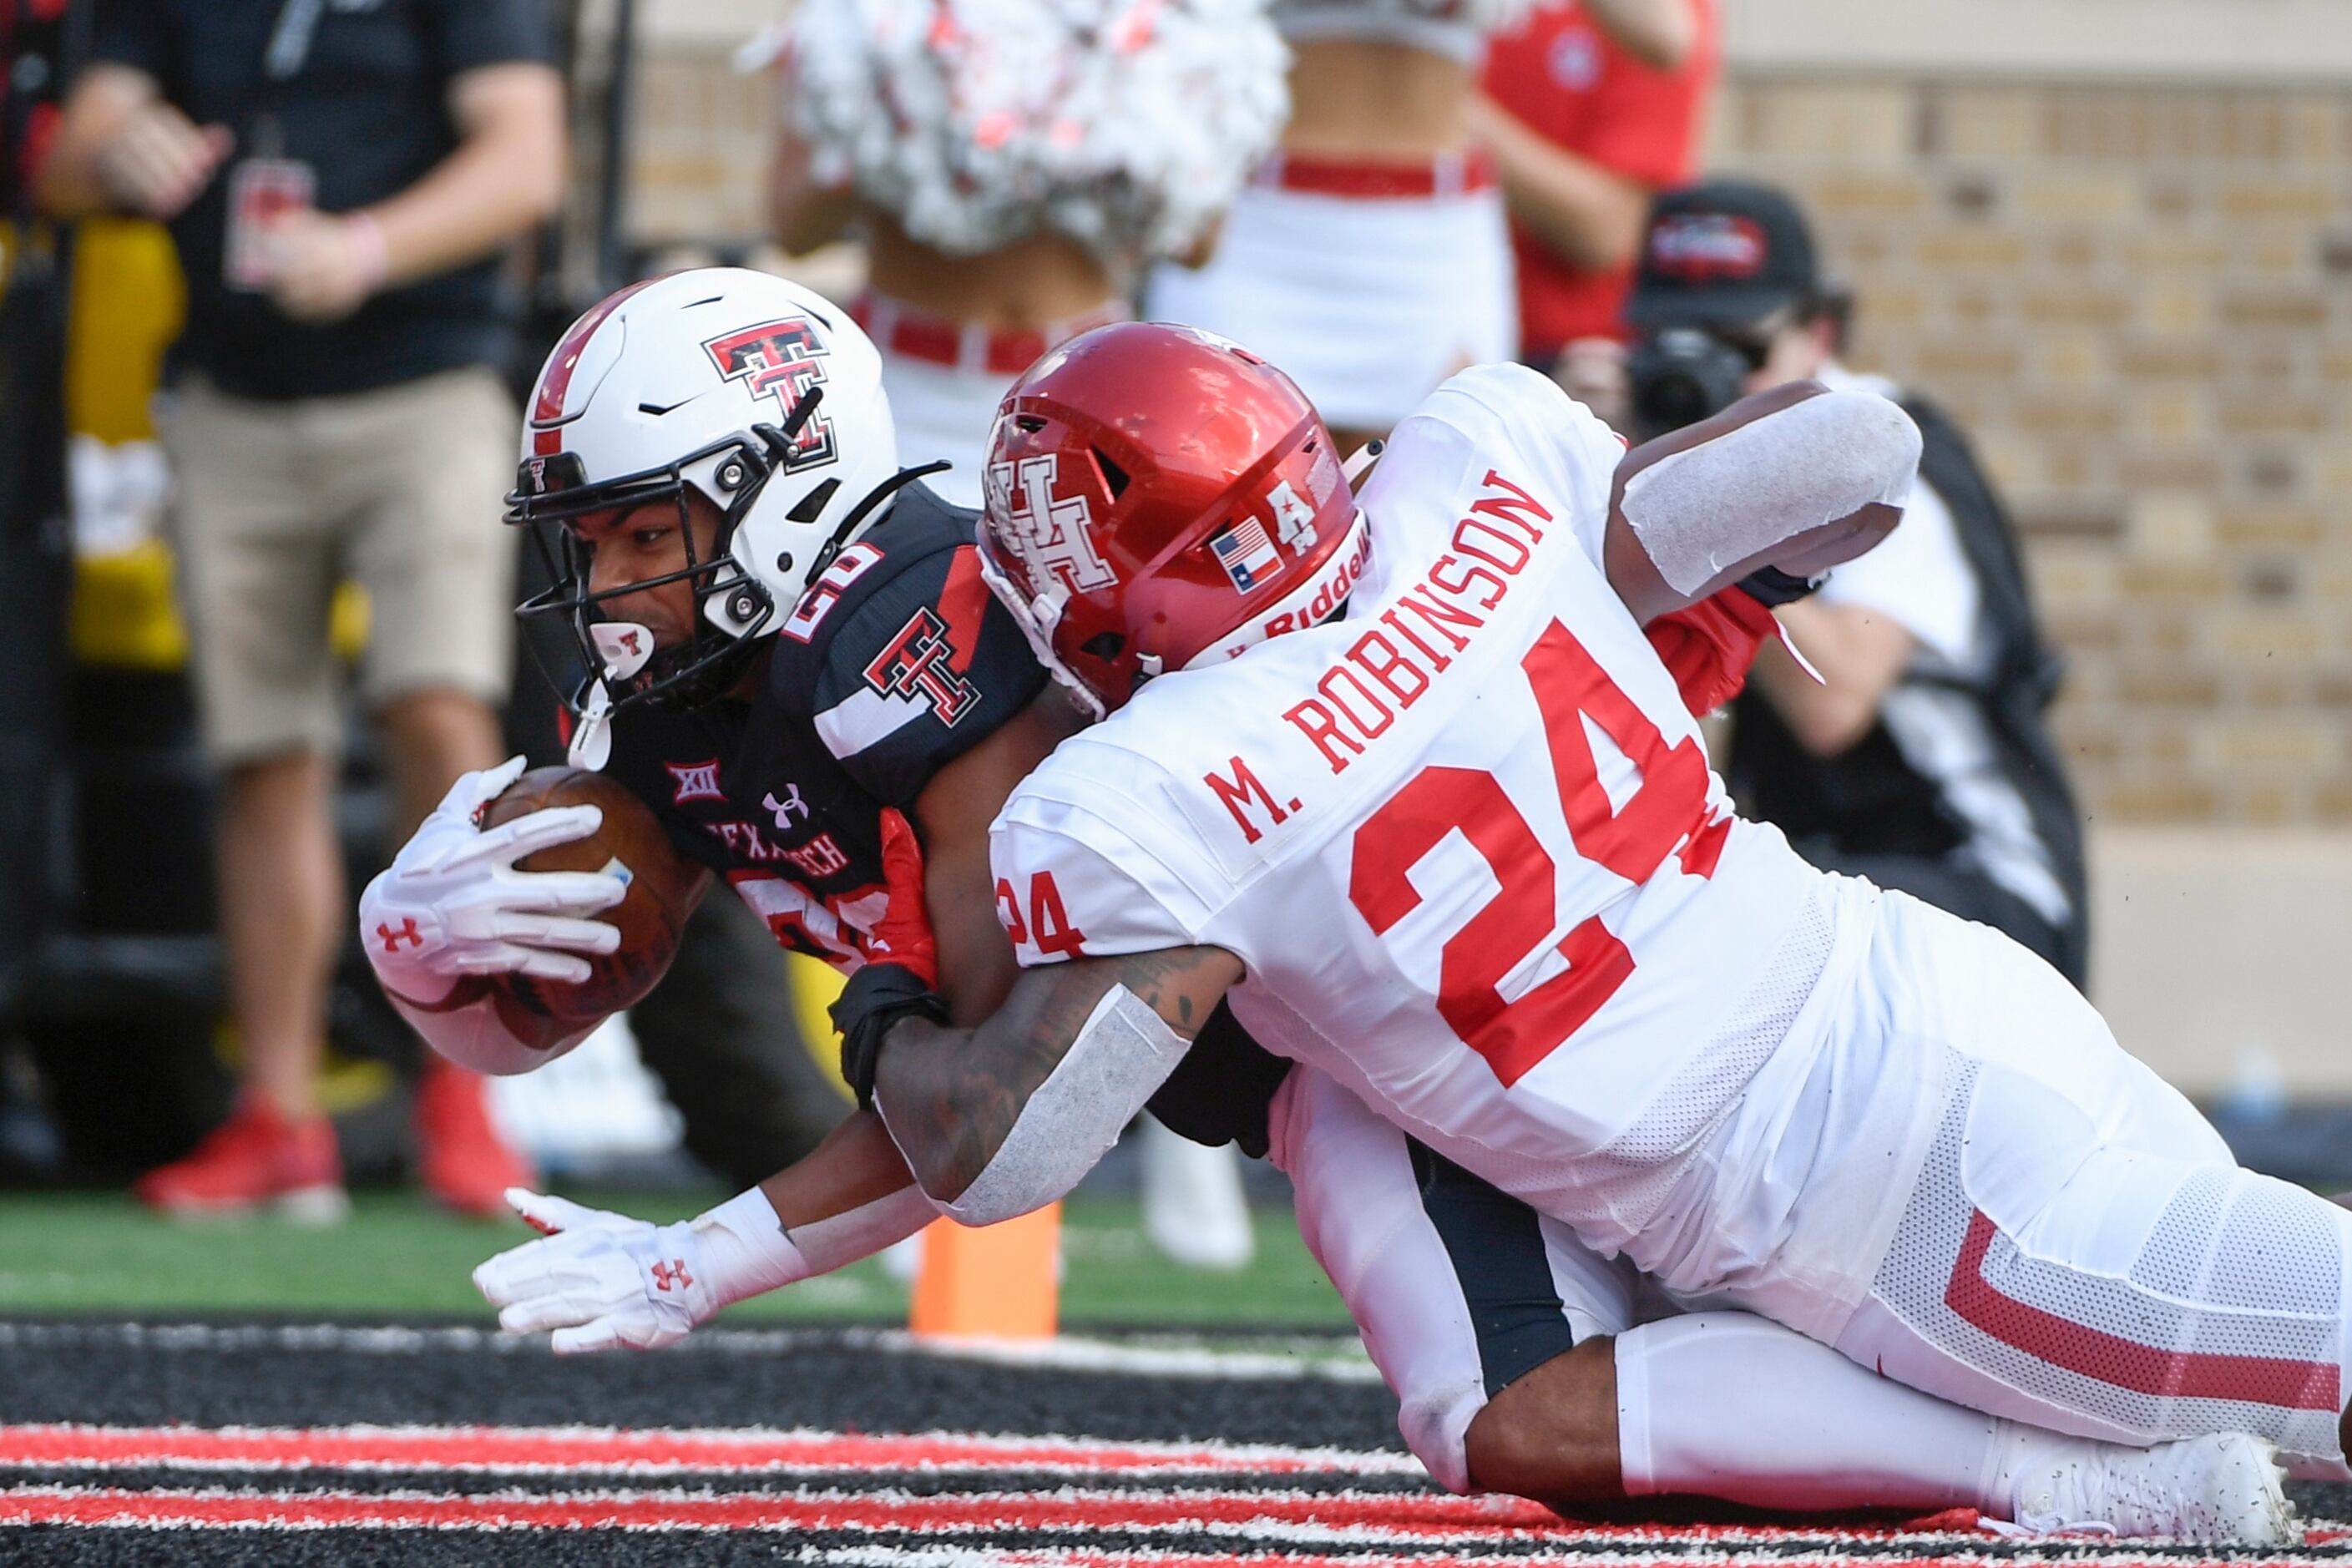 Sorry Texas Tech fans, Patrick Mahomes had to enter NFL Draft Heartland  College Sports - An Independent Big 12 Today Blog, College Football News